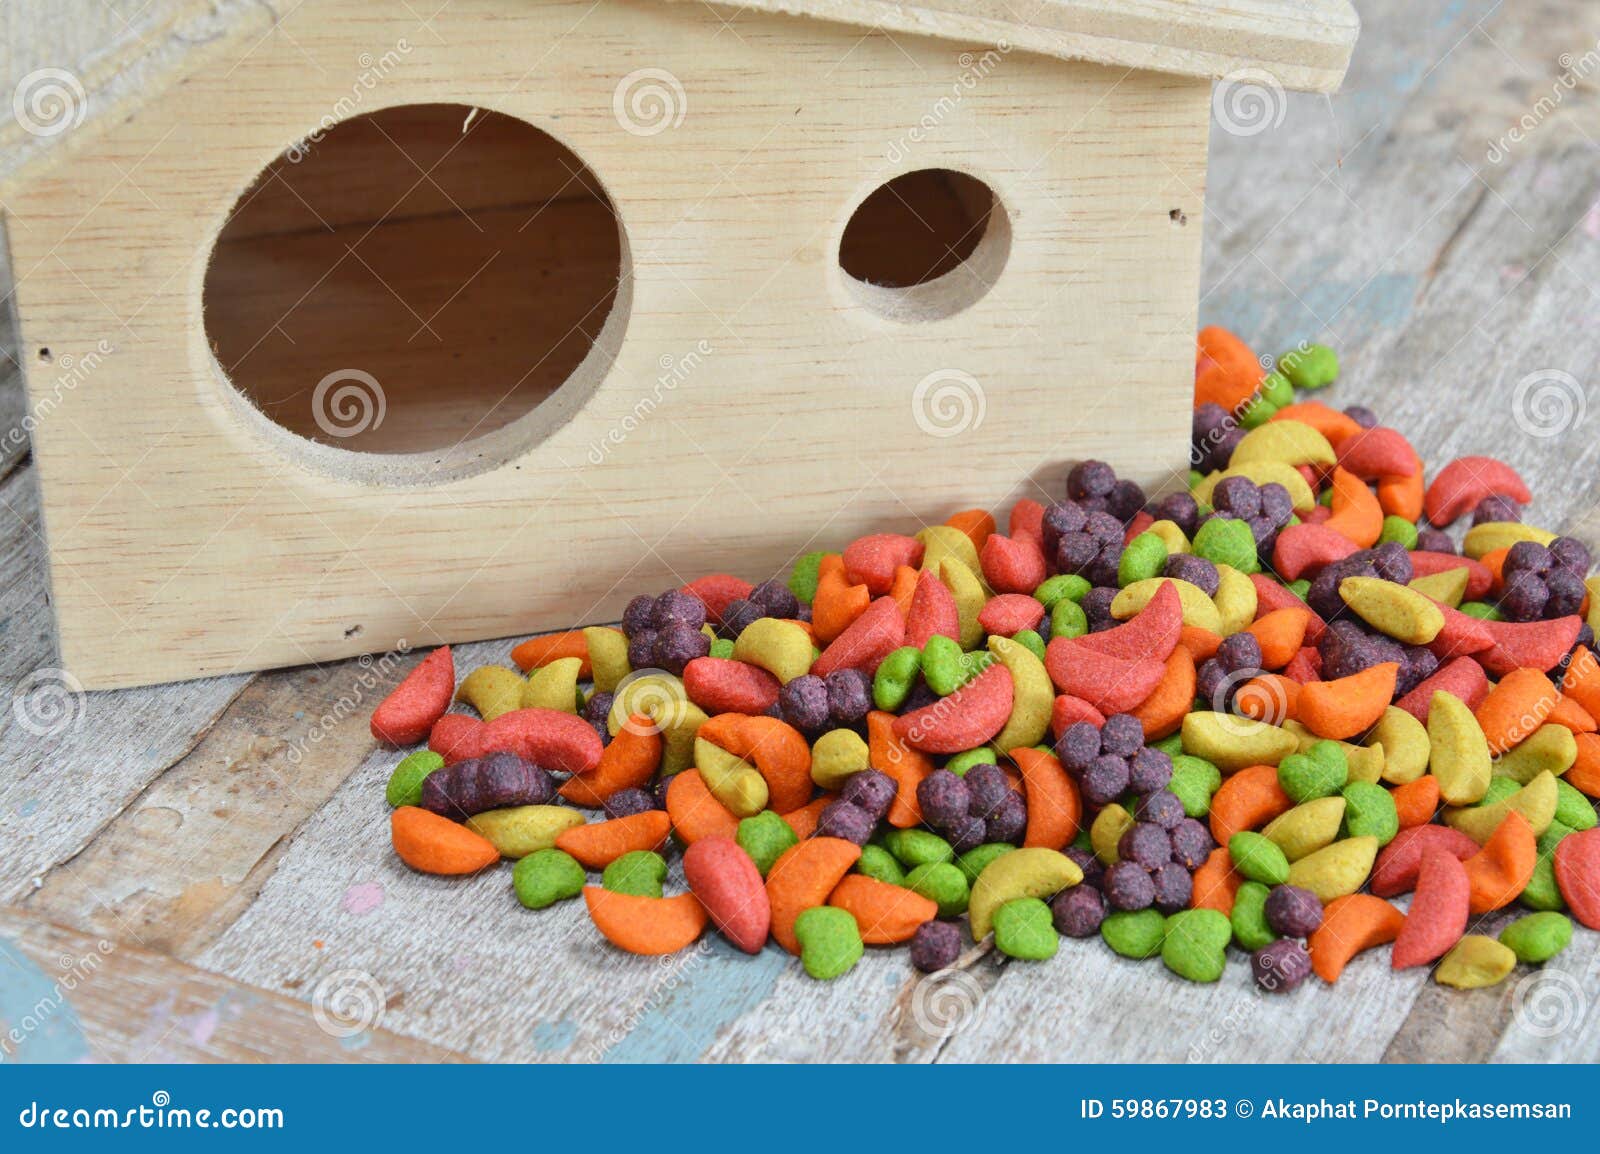 Bird Food And Little House Stock Photo - Image: 59867983